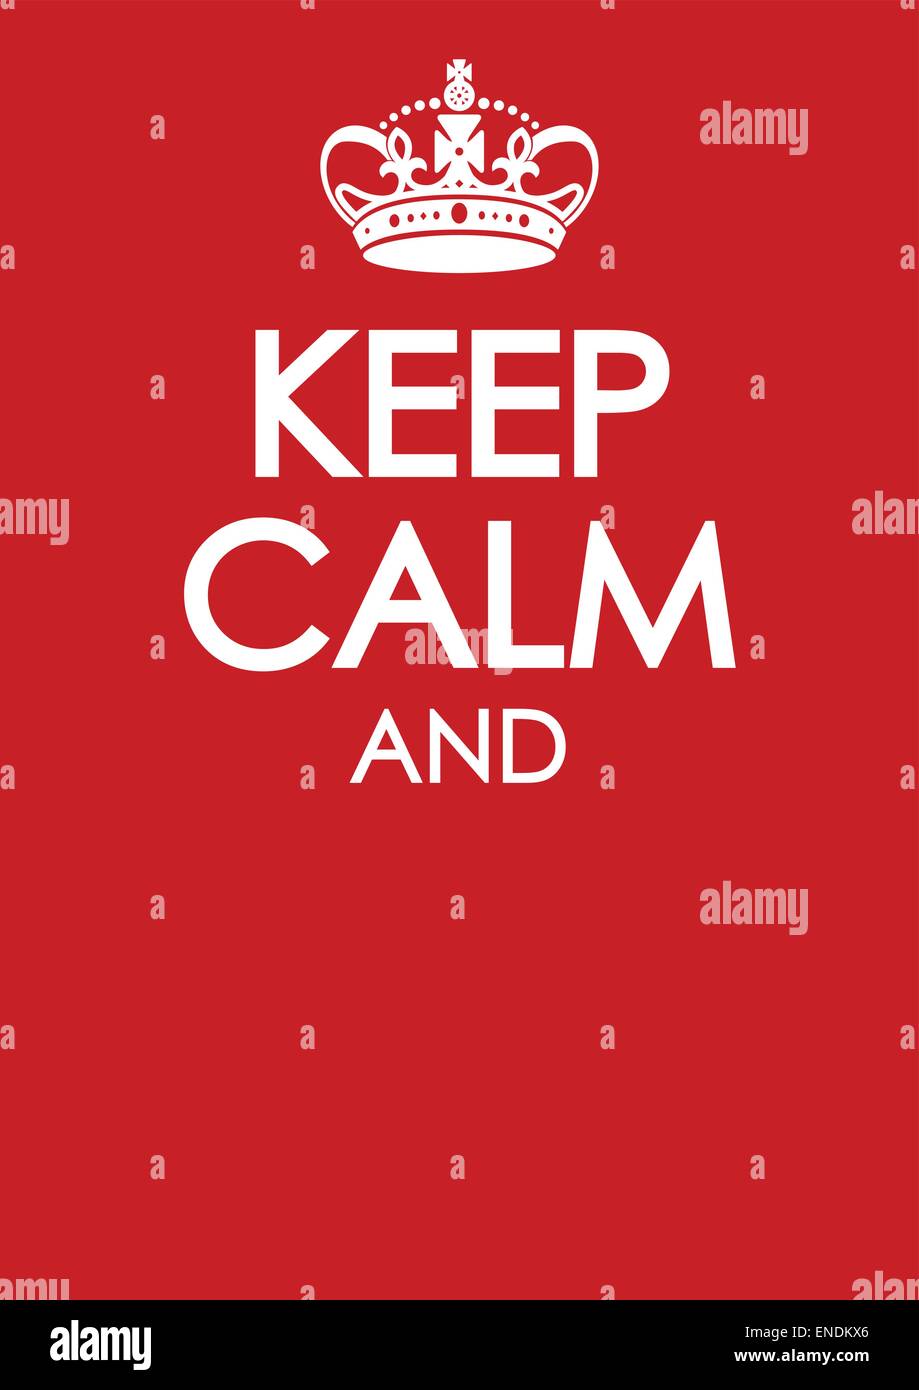 keep calm and carry on poster template with similar crown vector Stock Vector